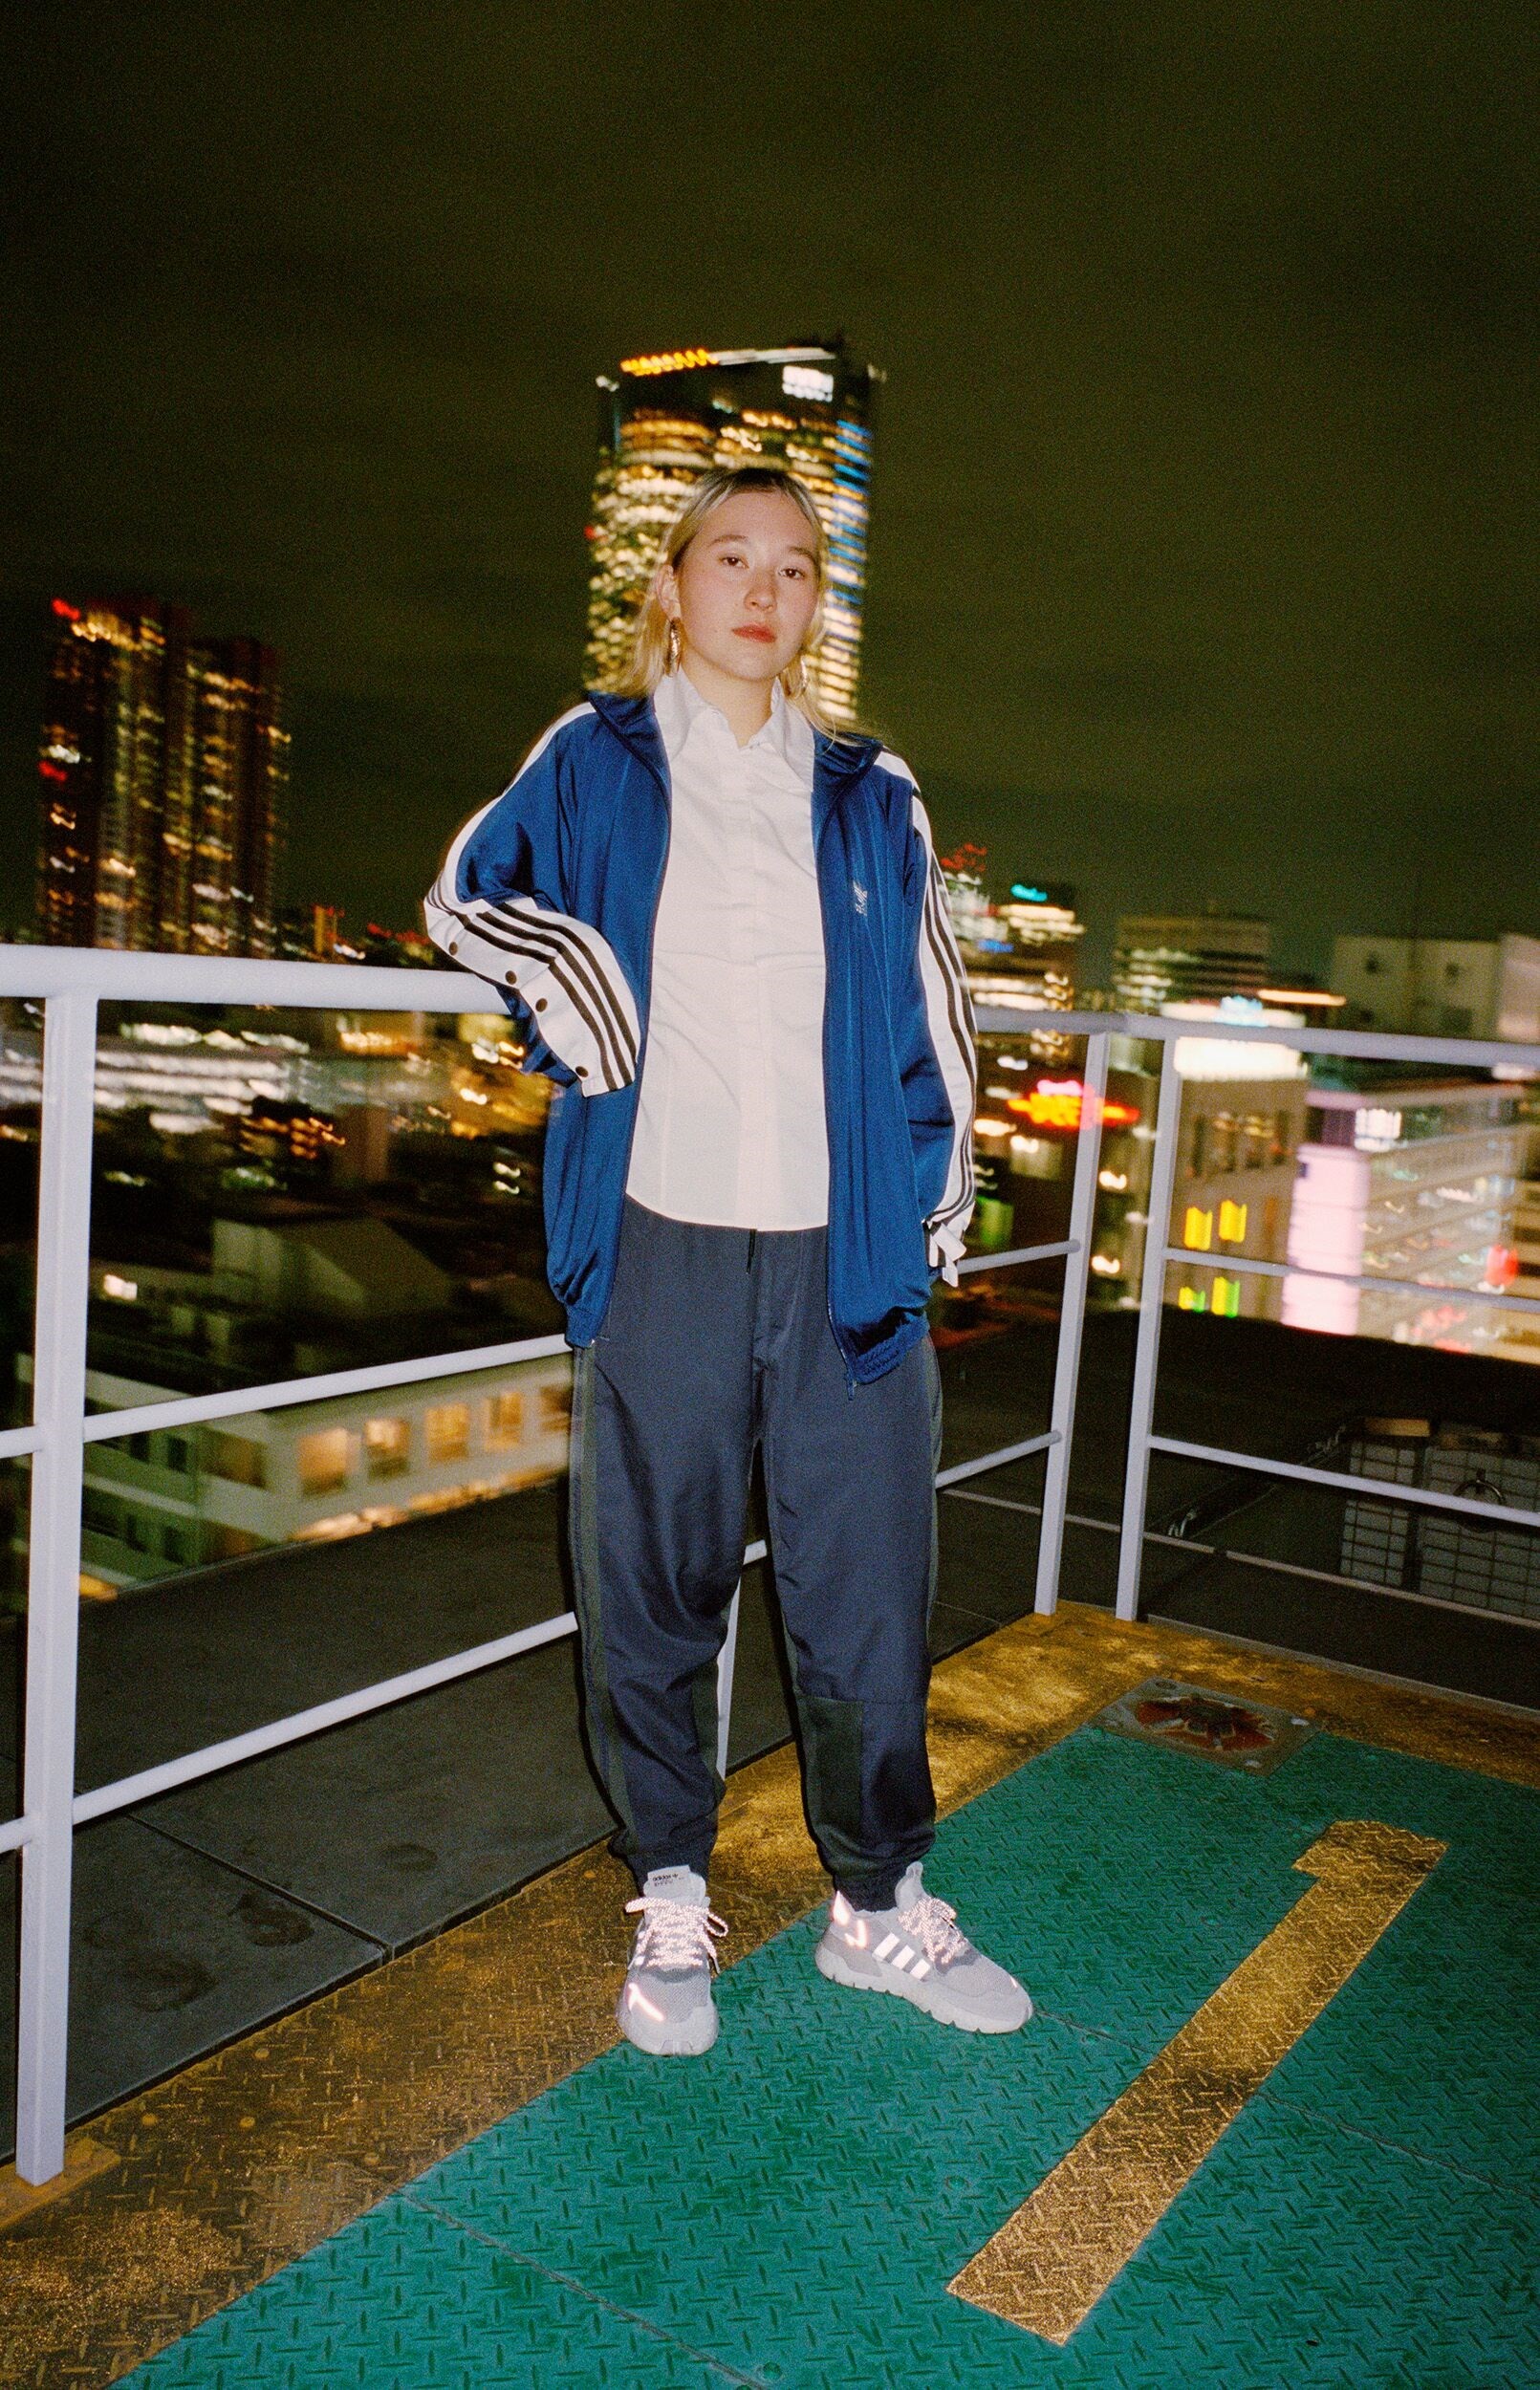 Almacén Aumentar Patentar adidas Originals teams up with Mount Kimbie and Frank Lebon on a new film |  Dazed